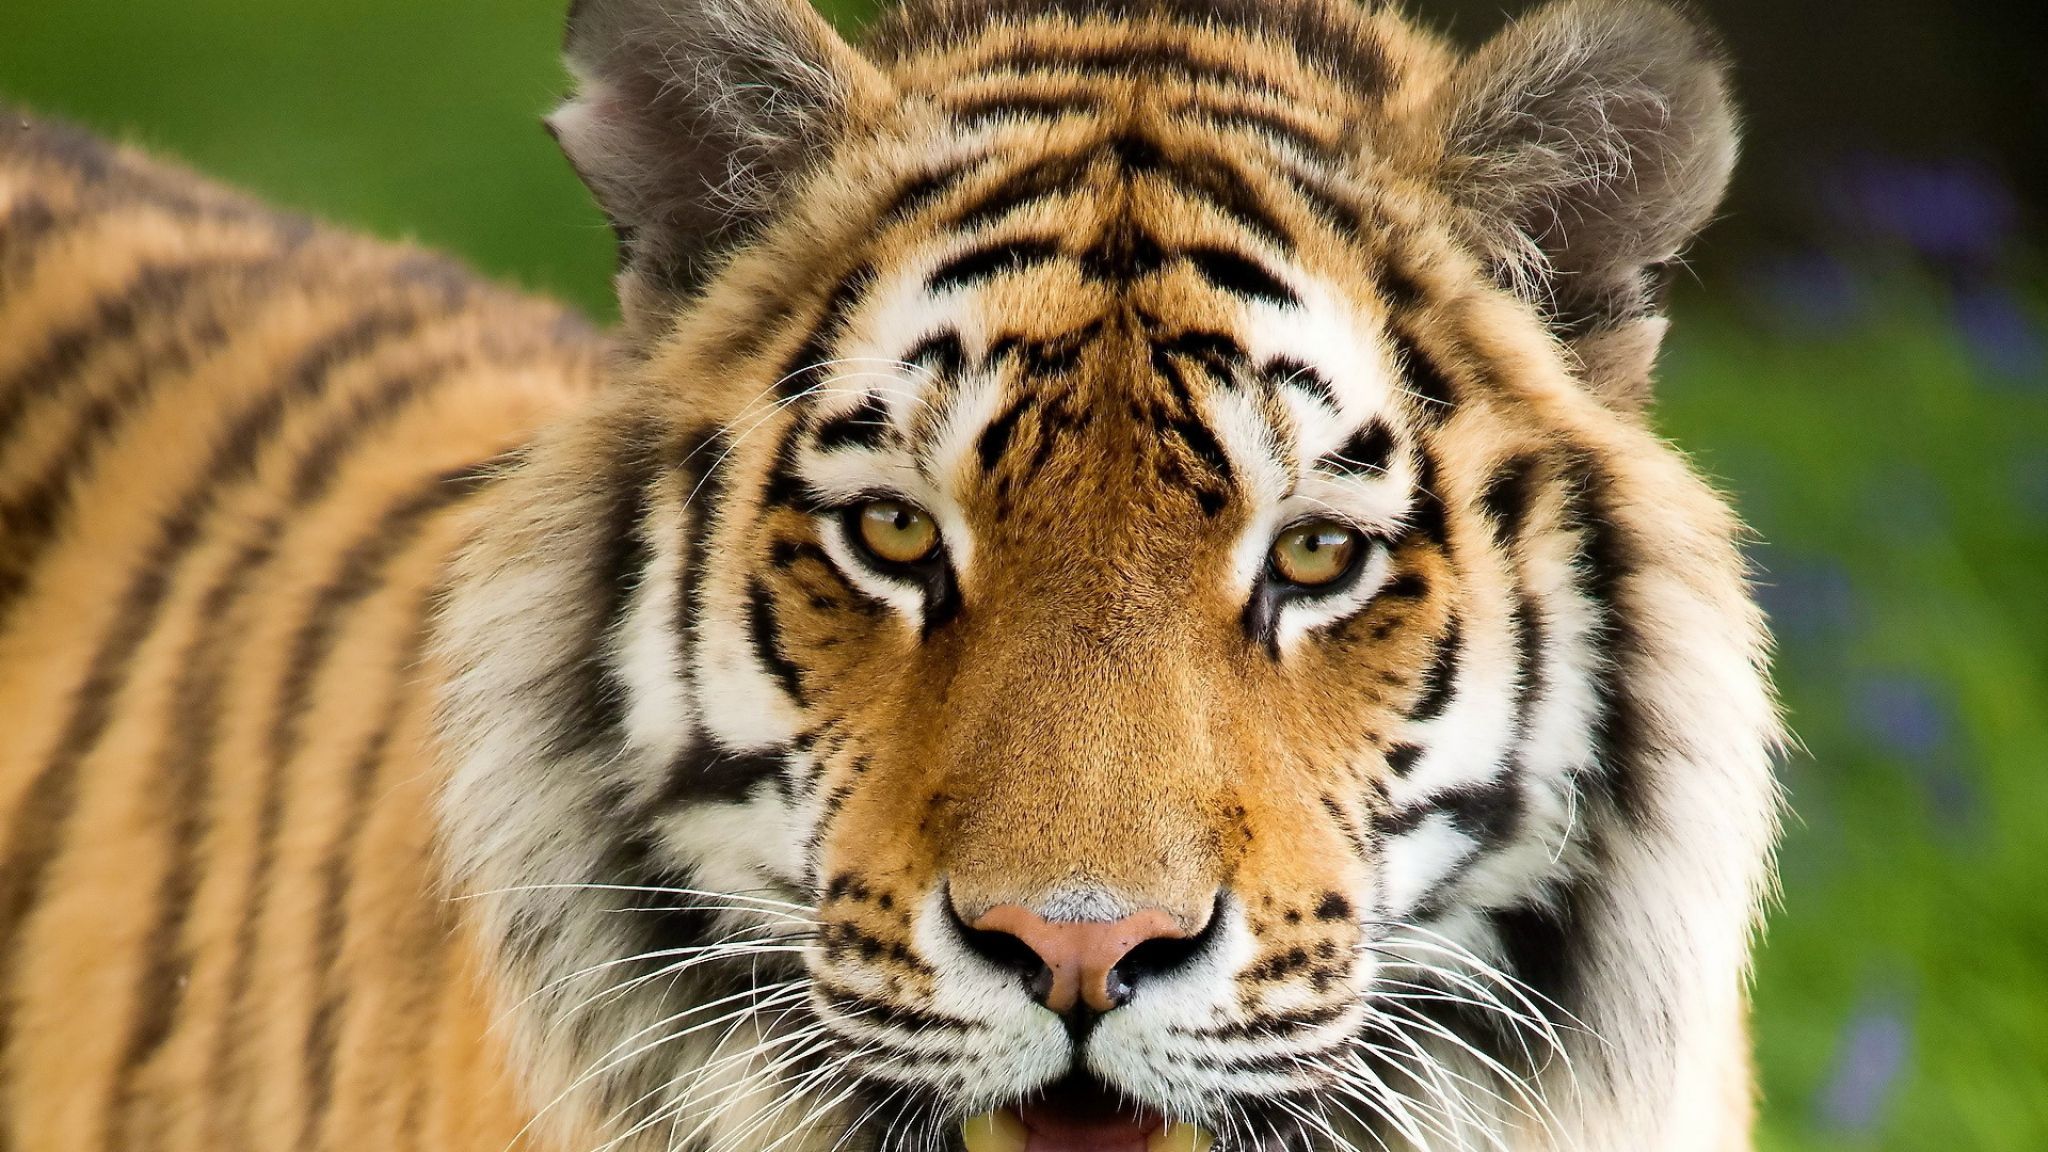 Download Wallpaper 2048x1152 Tiger, Aggression, Face, Mouth open ...